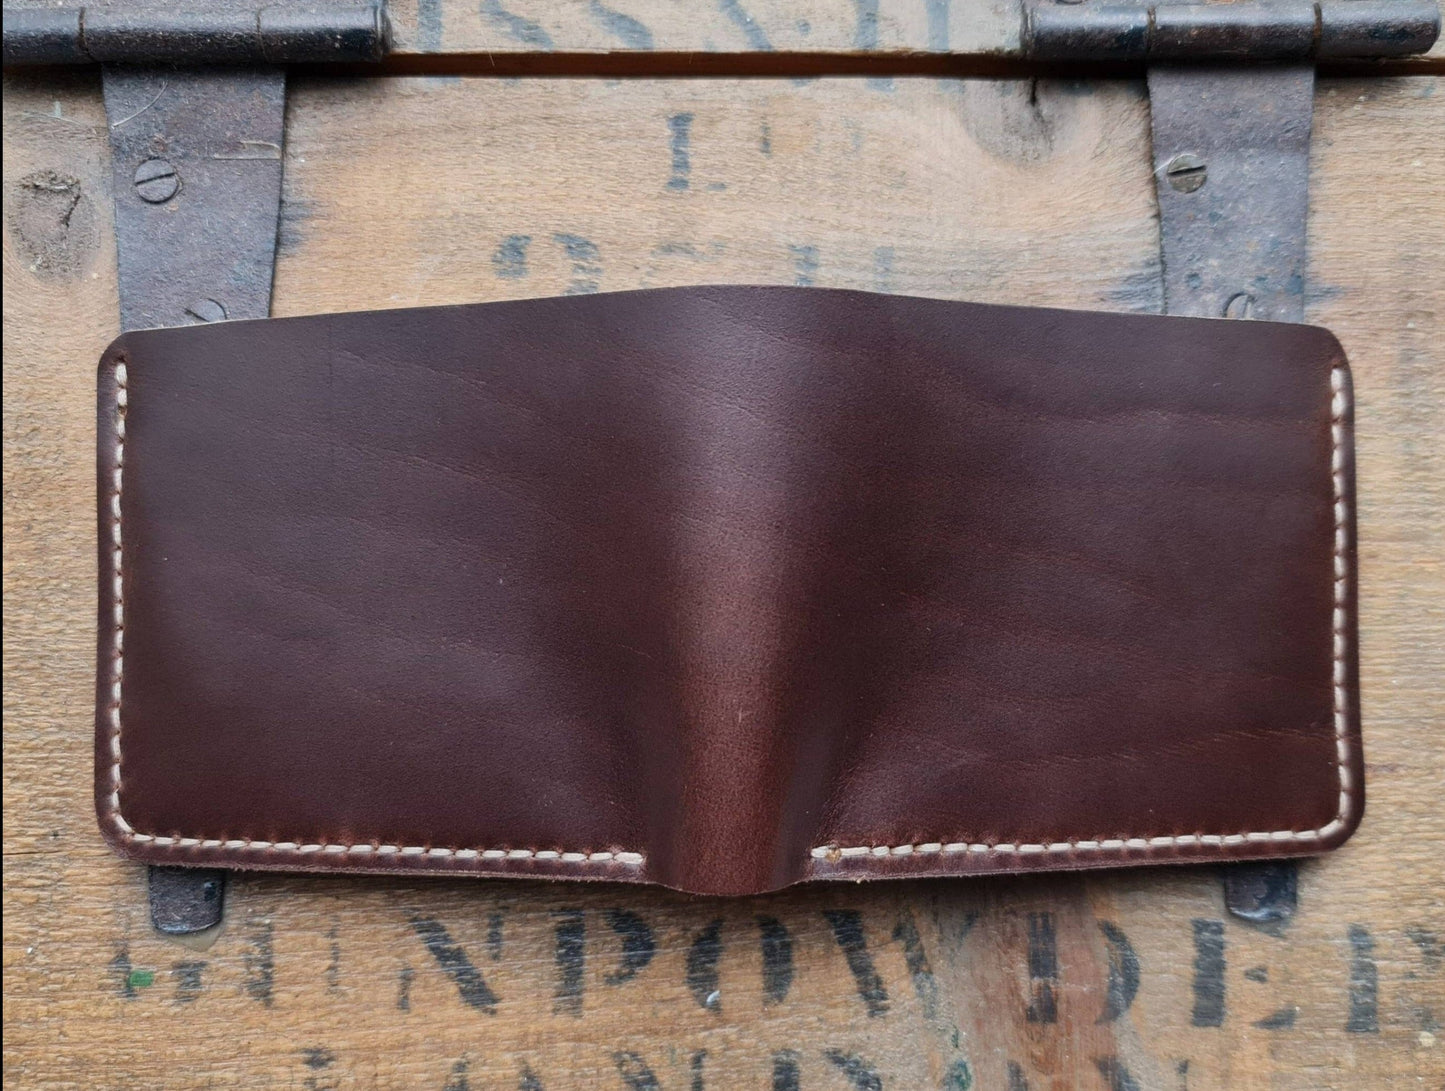 No. 2 Frontiersman Custom Leather Wallets, Horween Brown Chromexcel Leather, Back Open